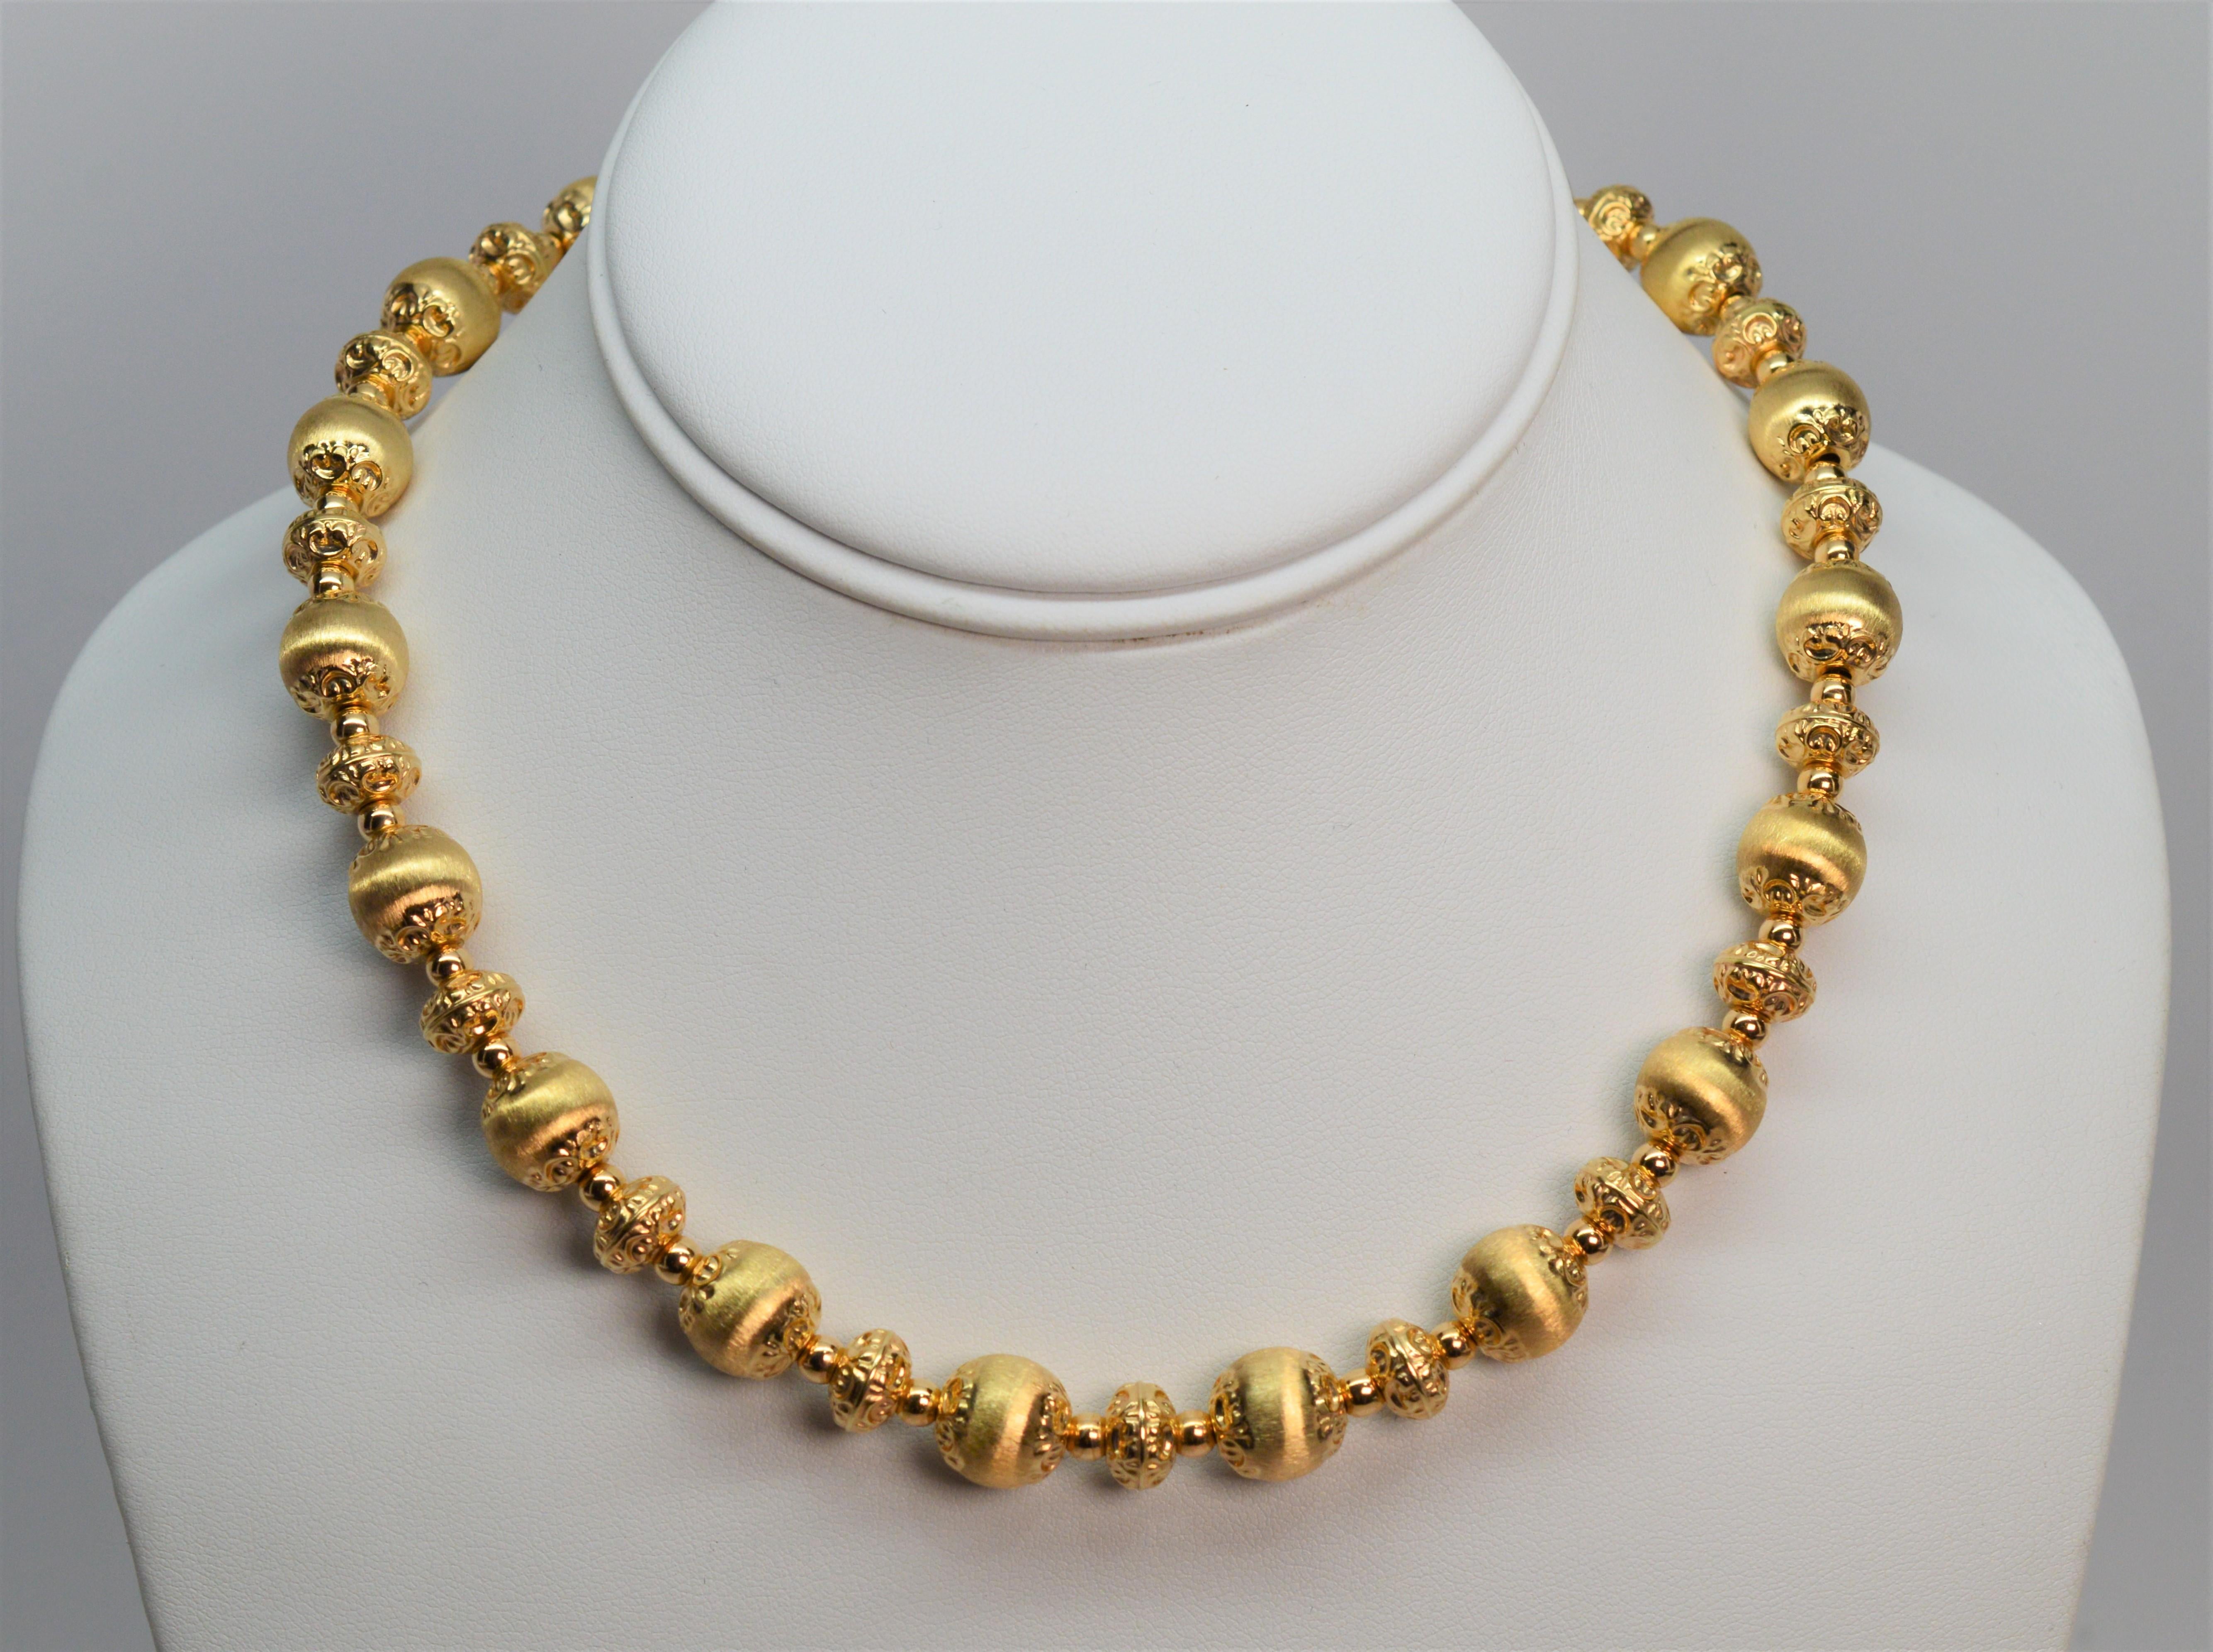 necklace with gold beads